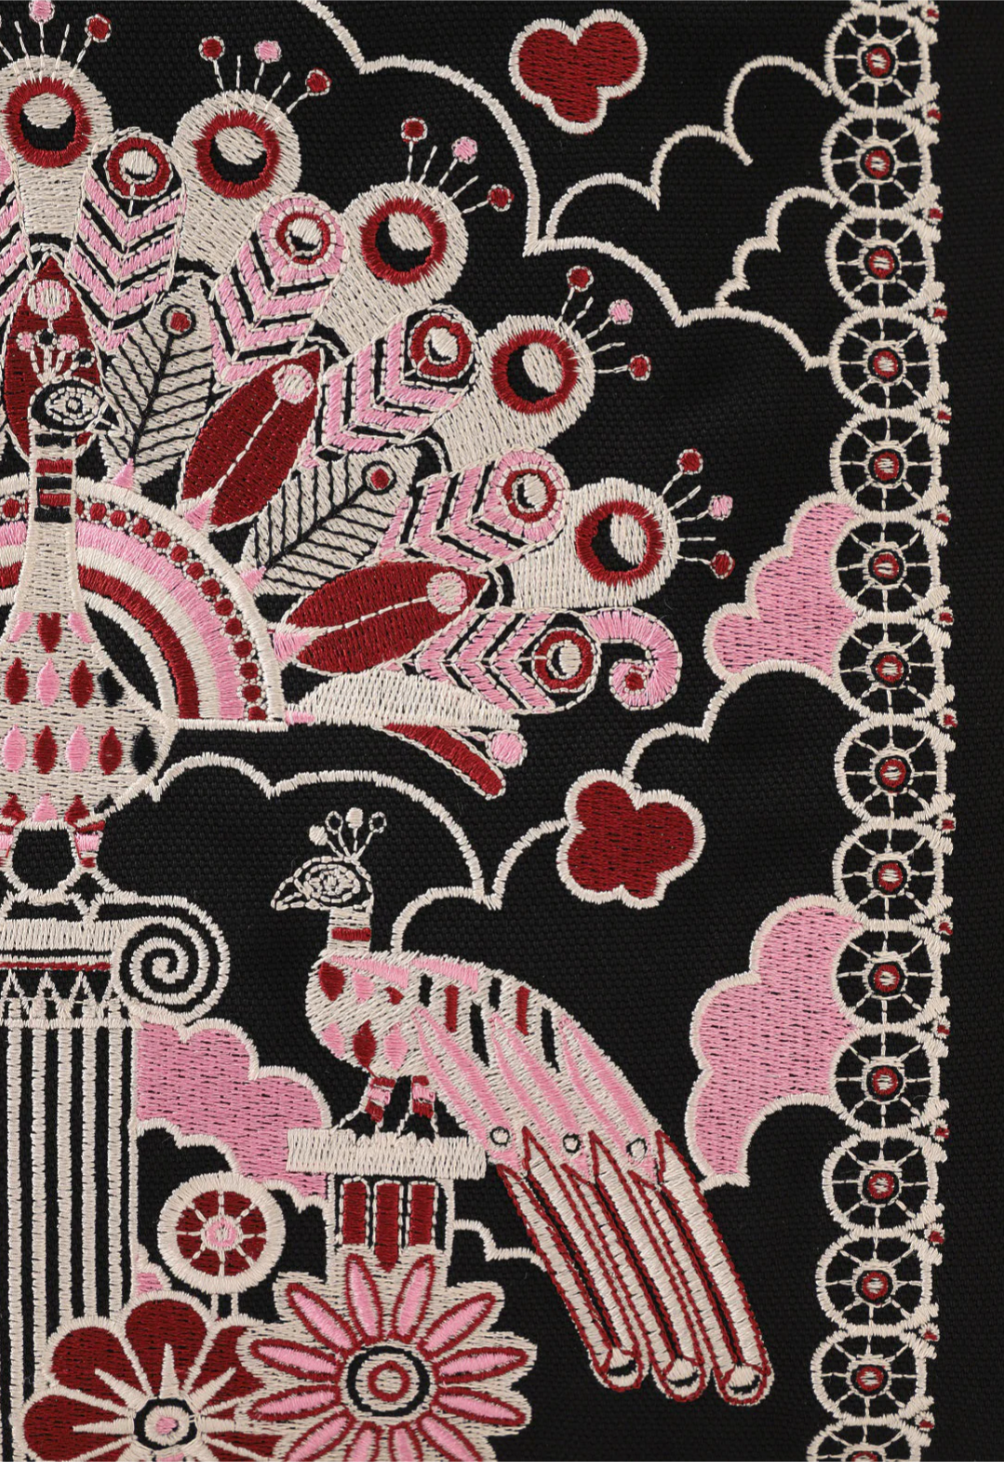 Detail of the large peacock art at the center of print surrounded by smaller pink and red peacocks